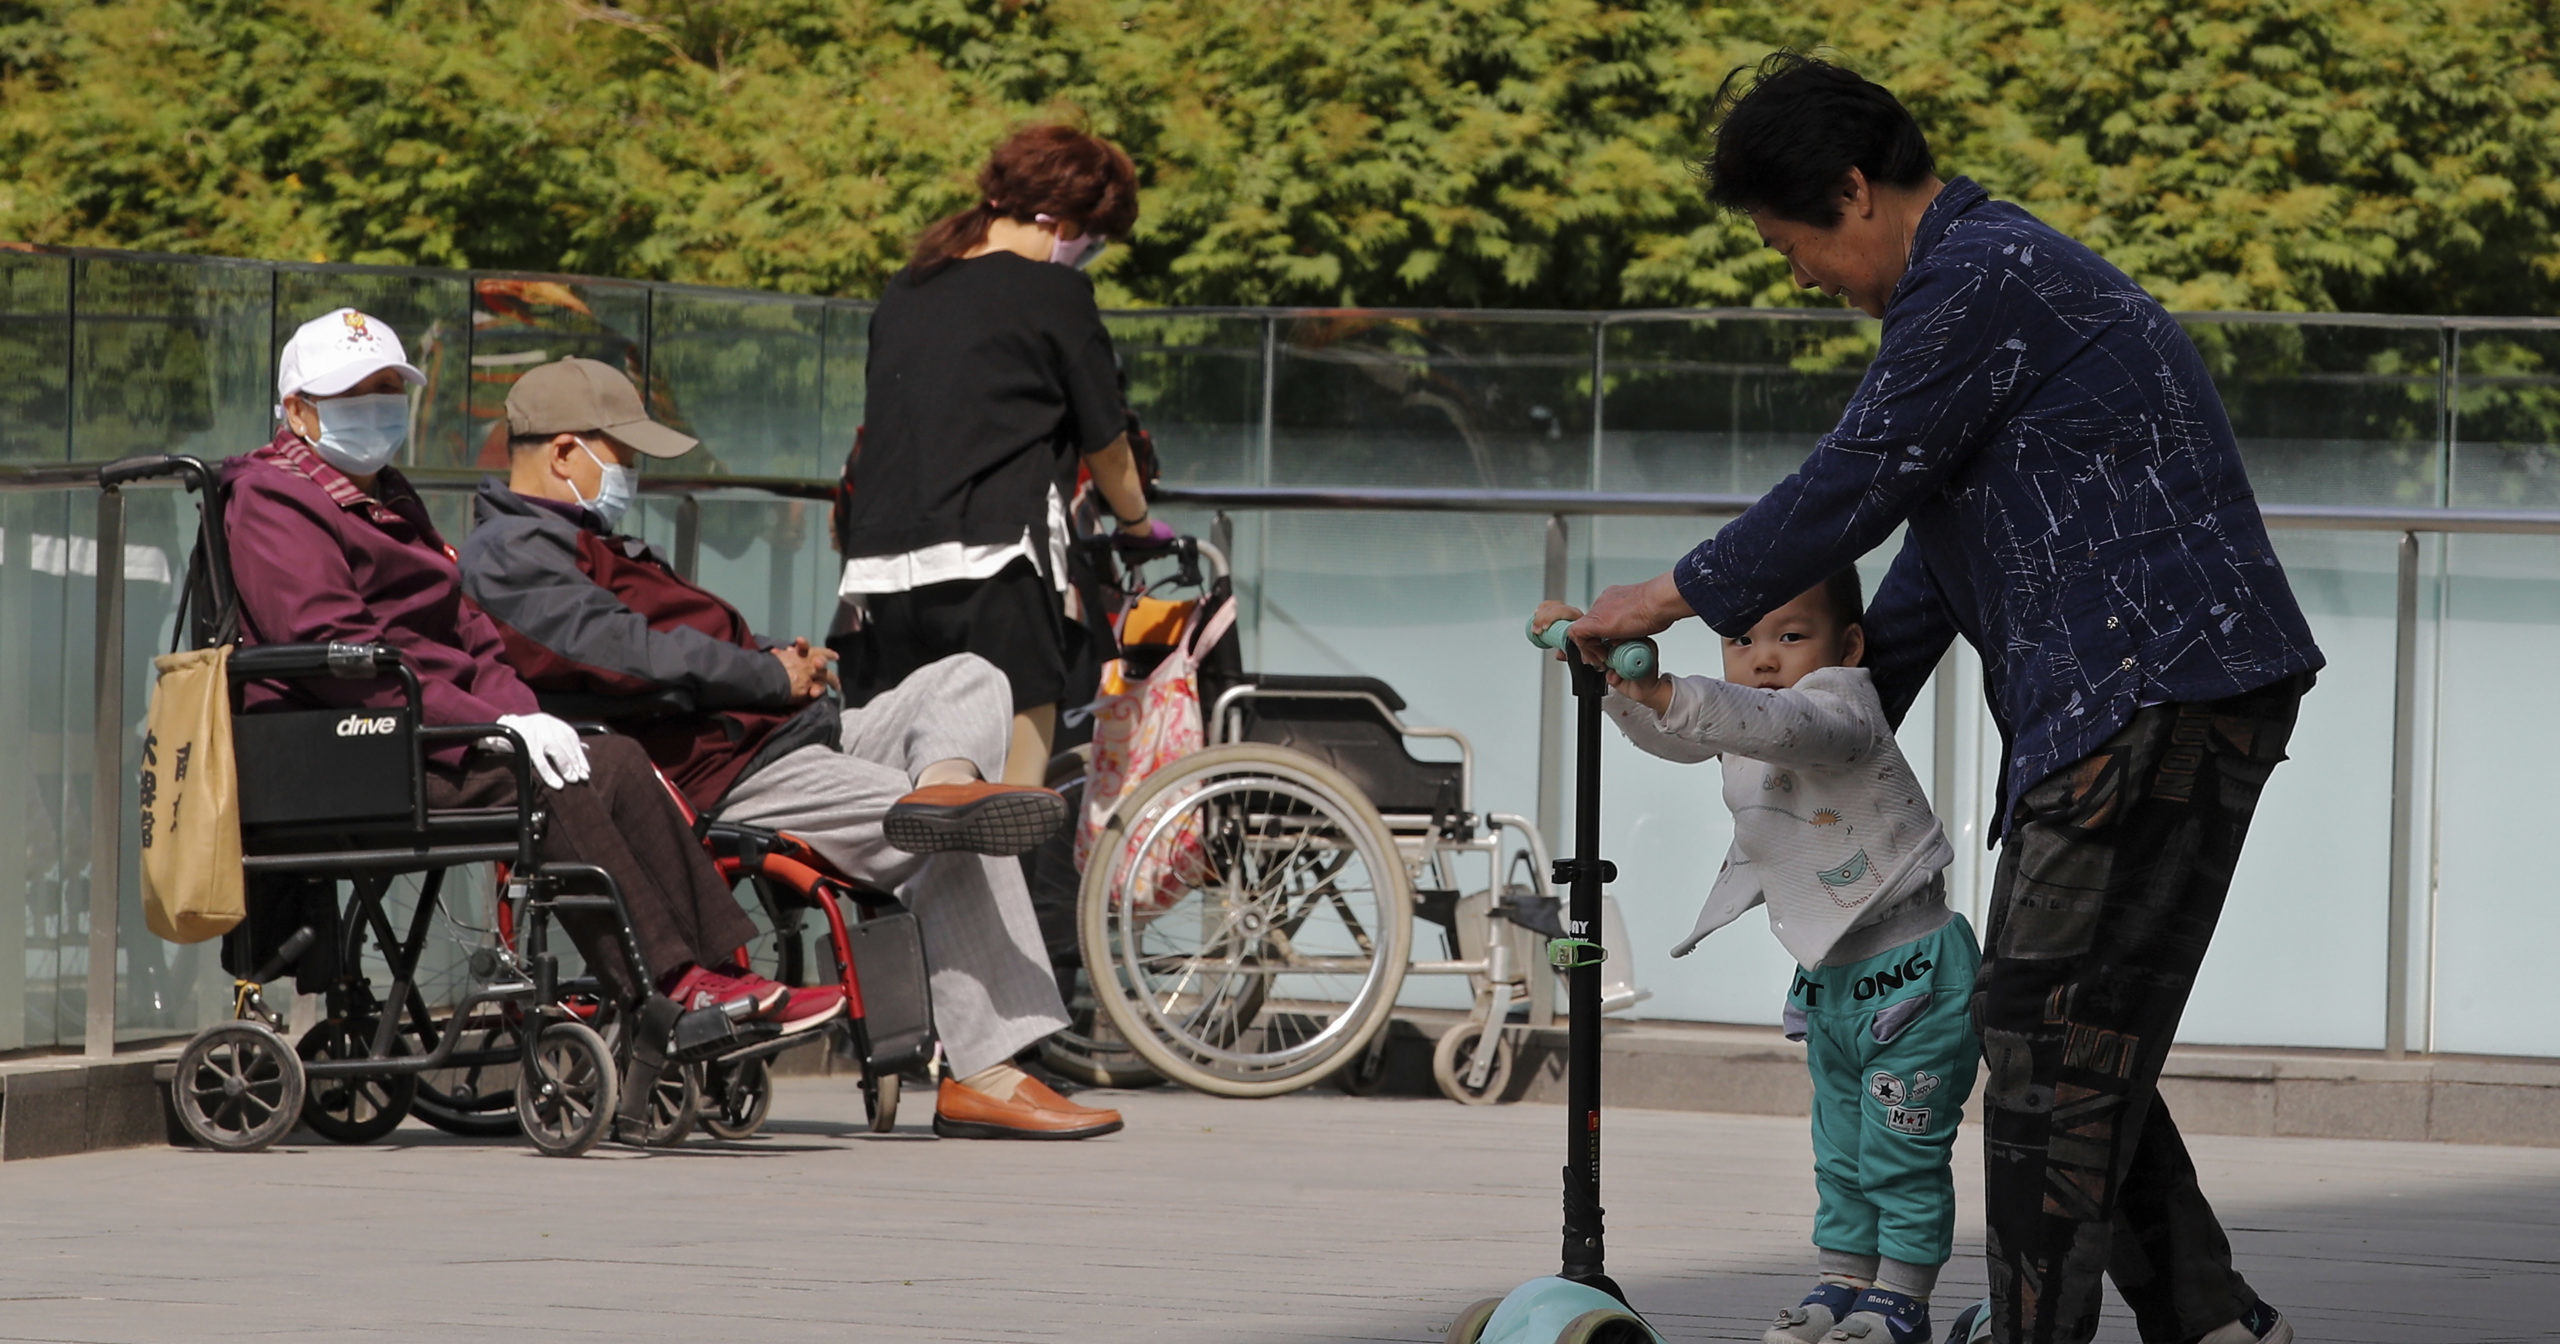 A woman plays with a child near elderly people in wheelchairs in Beijing on Monday.